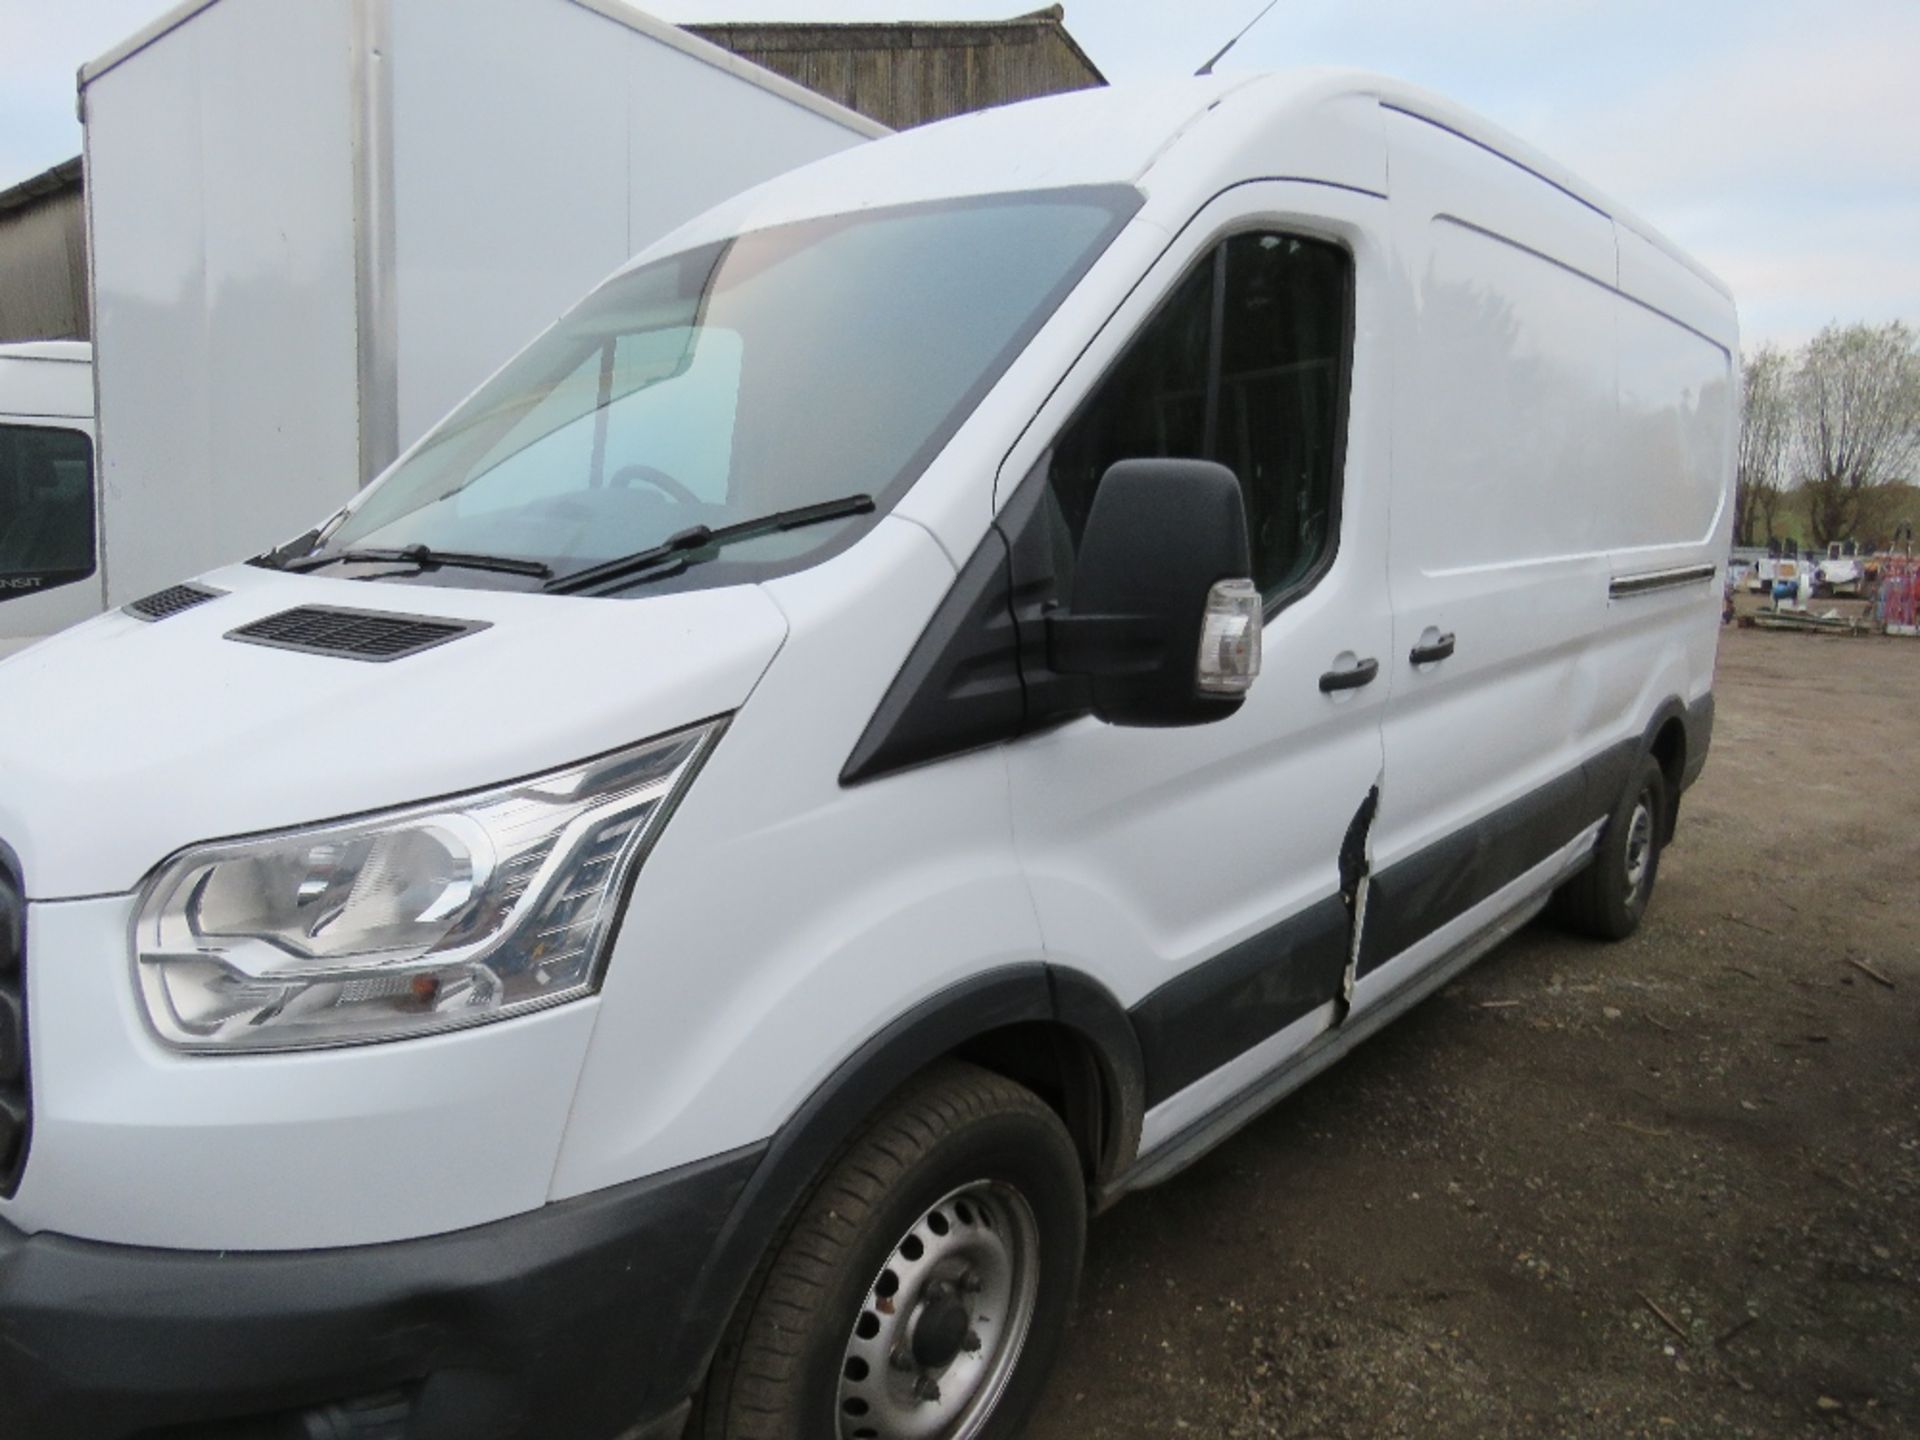 FORD TRANSIT 350 HIGH TOP LONG WHEEL BASE PANEL VAN REG:AJ64 DXC.EURO 5 EMMISSIONS. WITH V5. ONE OWN - Image 2 of 18